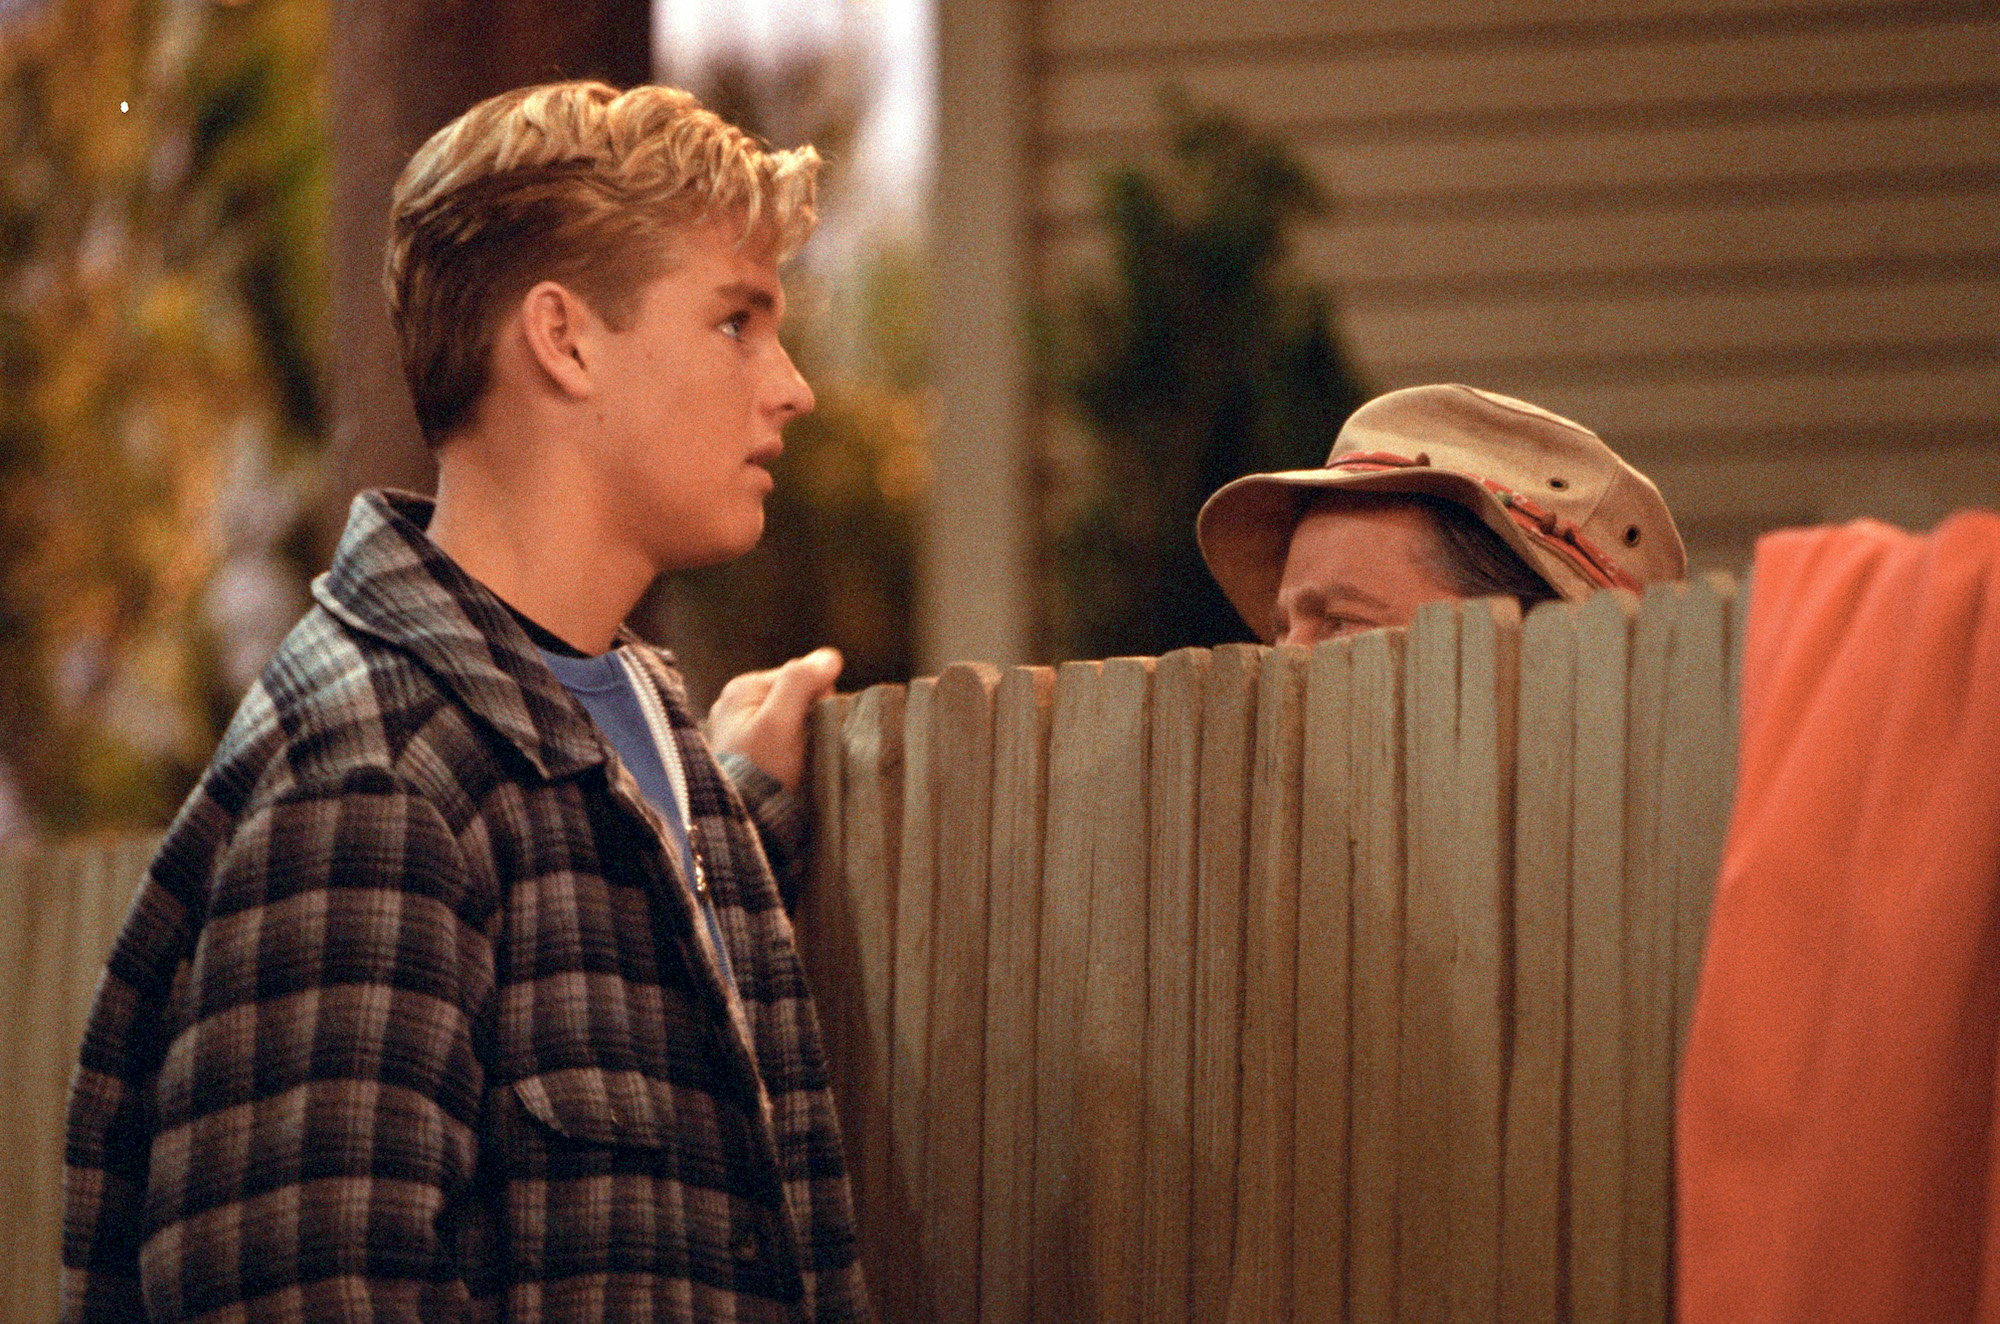 Home Improvement Zachery Ty Bryan Played The Oldest Brother Despite Being Younger